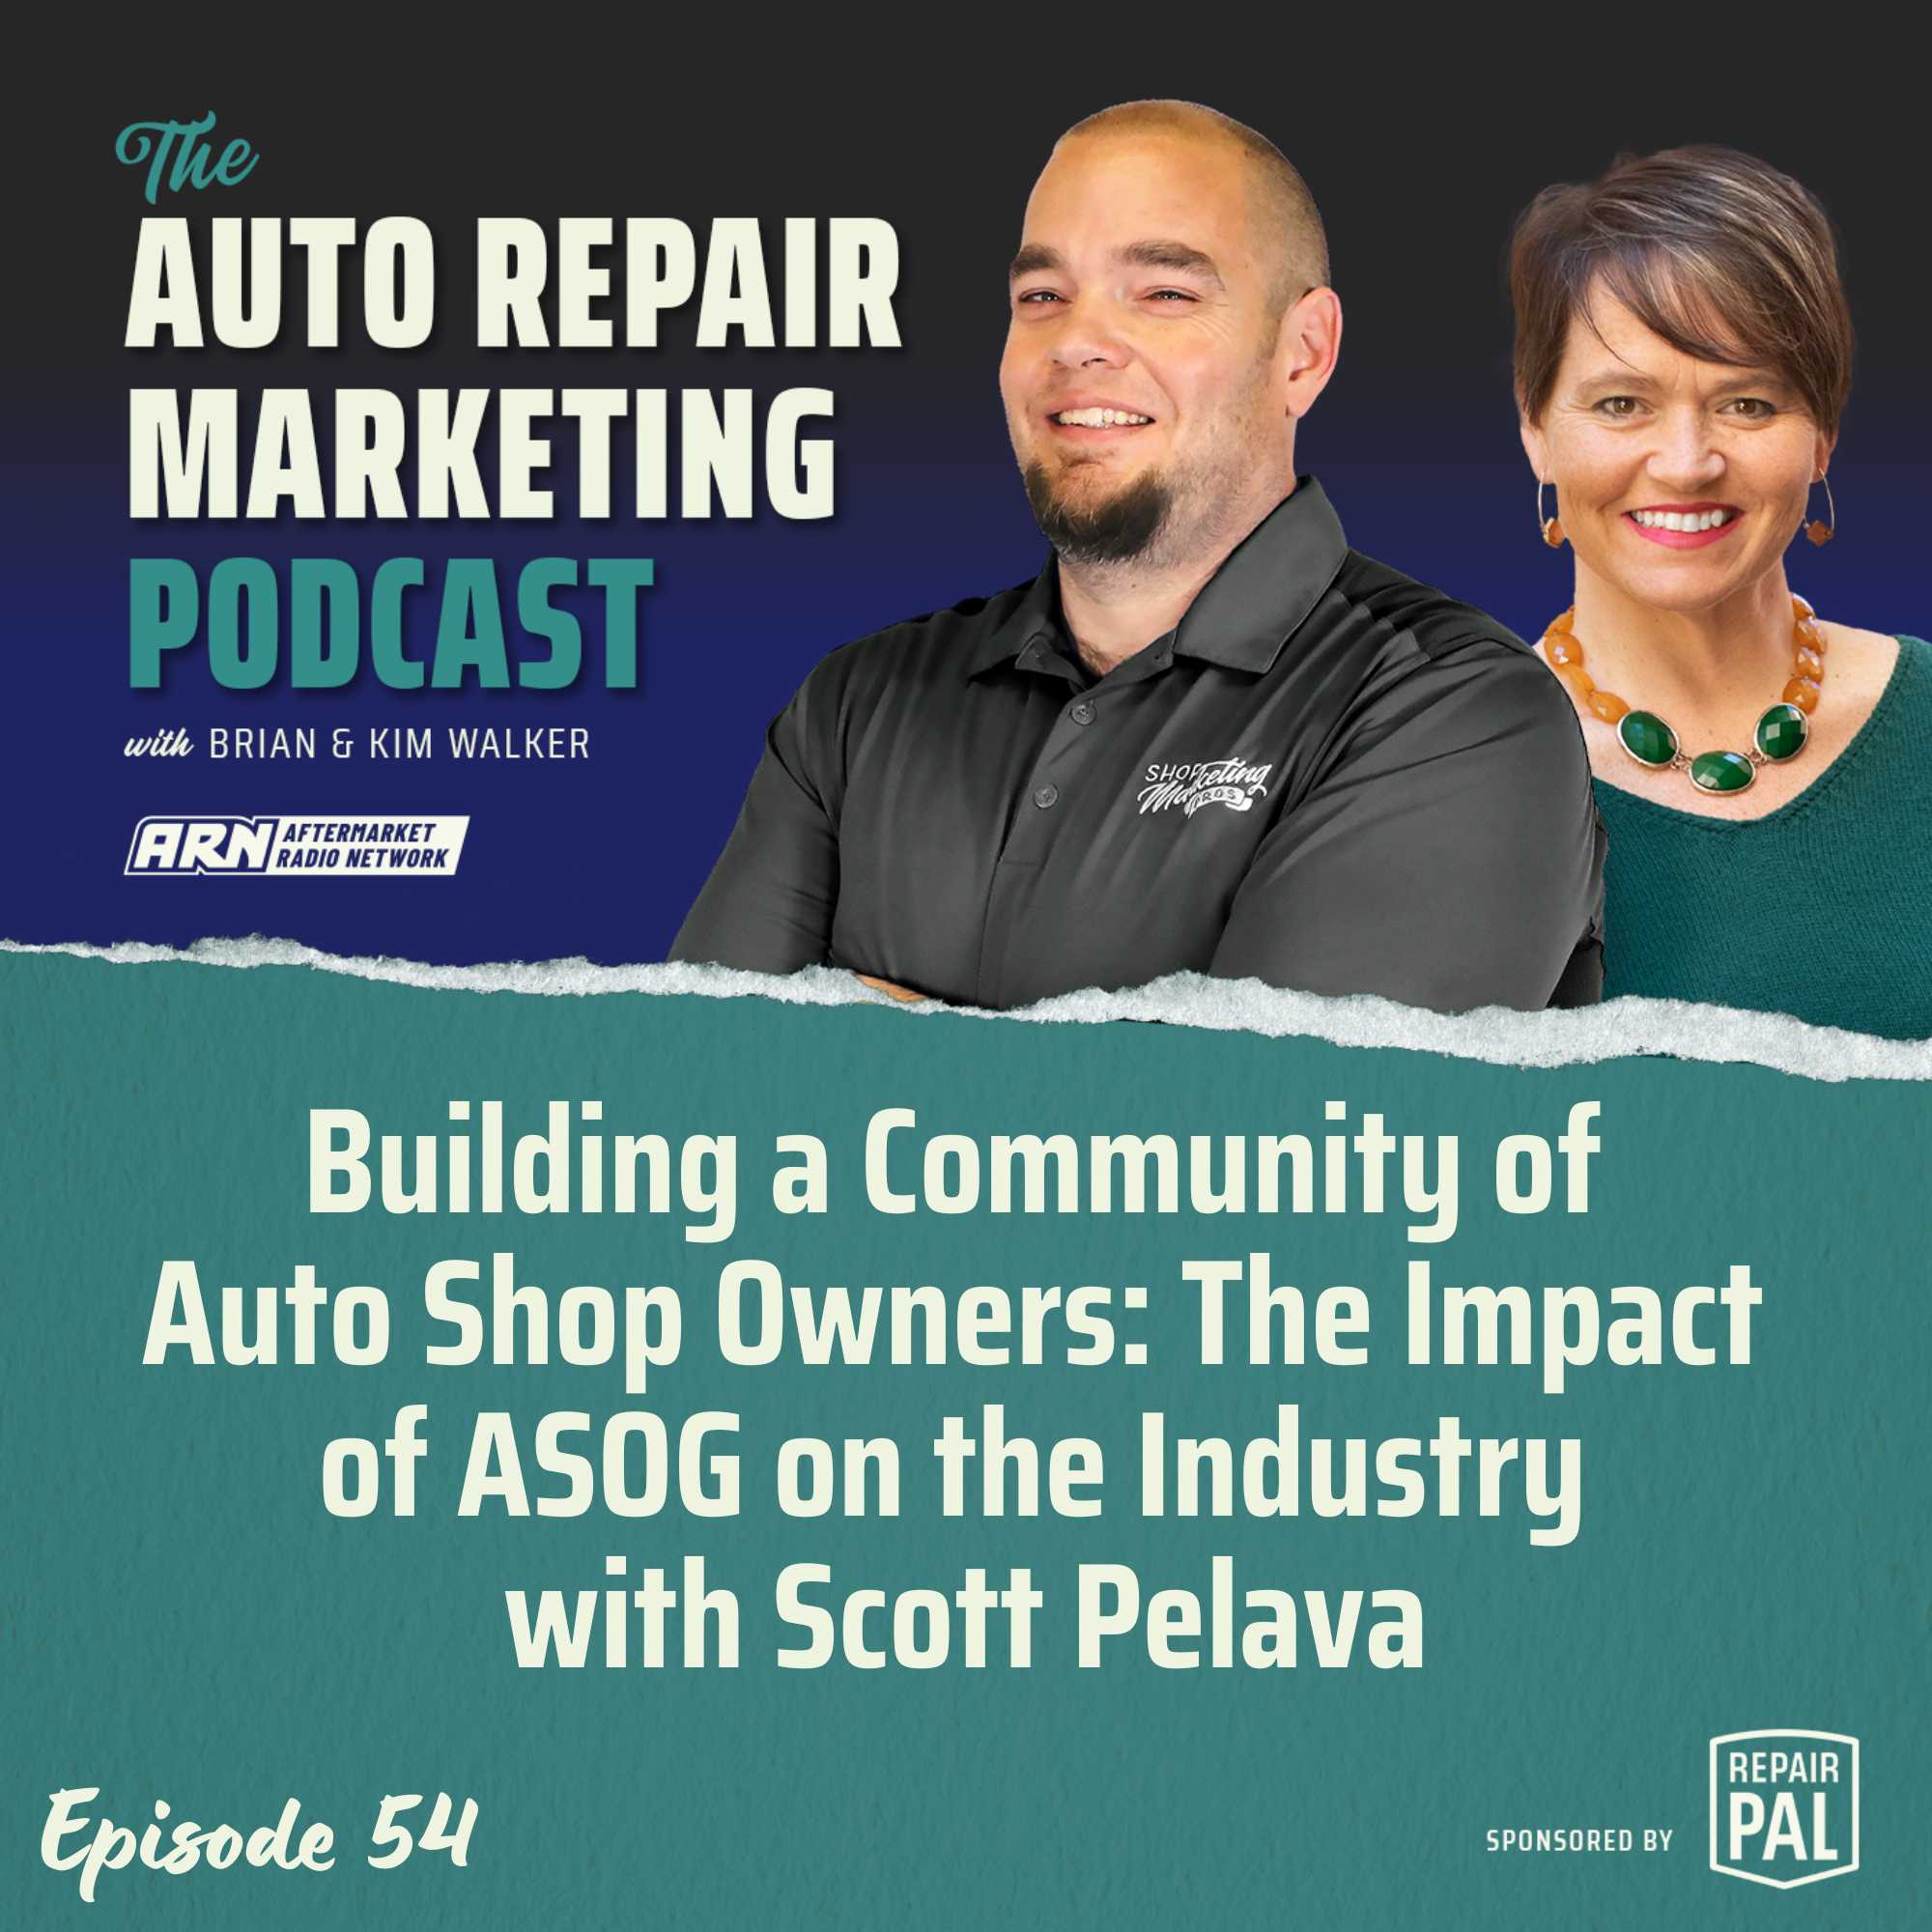 The Auto Repair Marketing Podcast with Brian and Kim Walker, Episode 54, titled "Building a Community of Auto Shop Owners: The Impact of ASOG on the Industry" featuring Scott Pelava. Brian and Kim Walker are smiling and standing side by side.